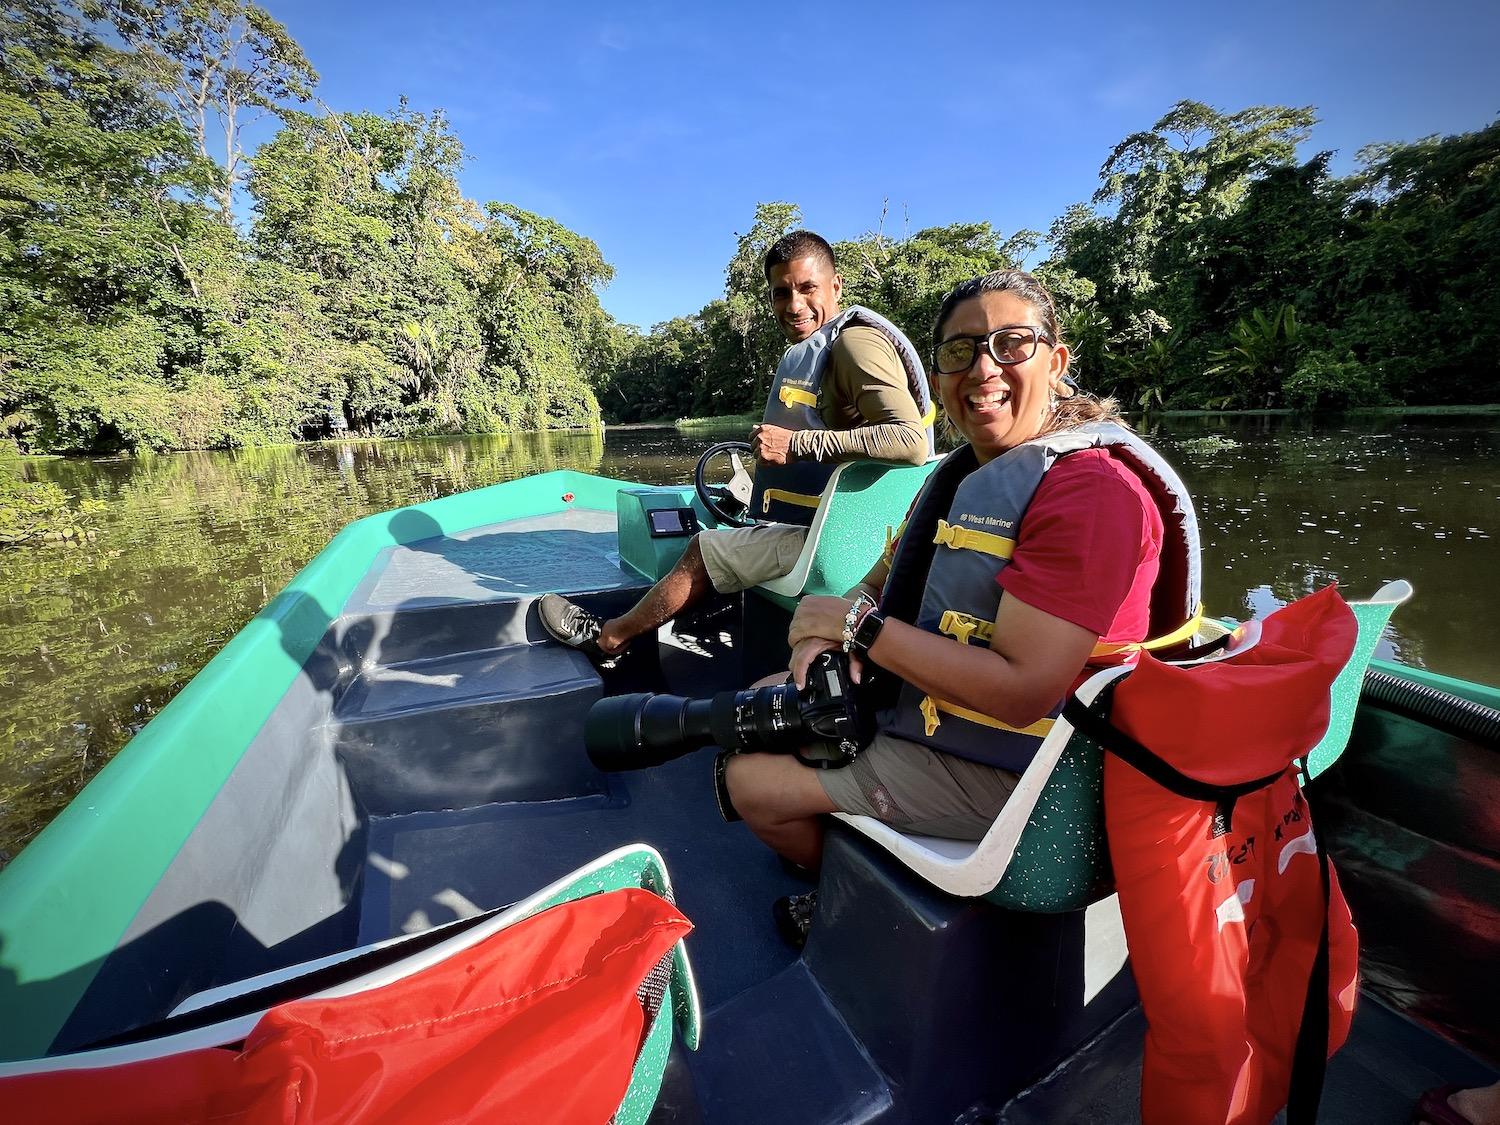 Exodus Travels guide Monica Leal and boat driver Michael Bennet in Tortugero National Park's canals.